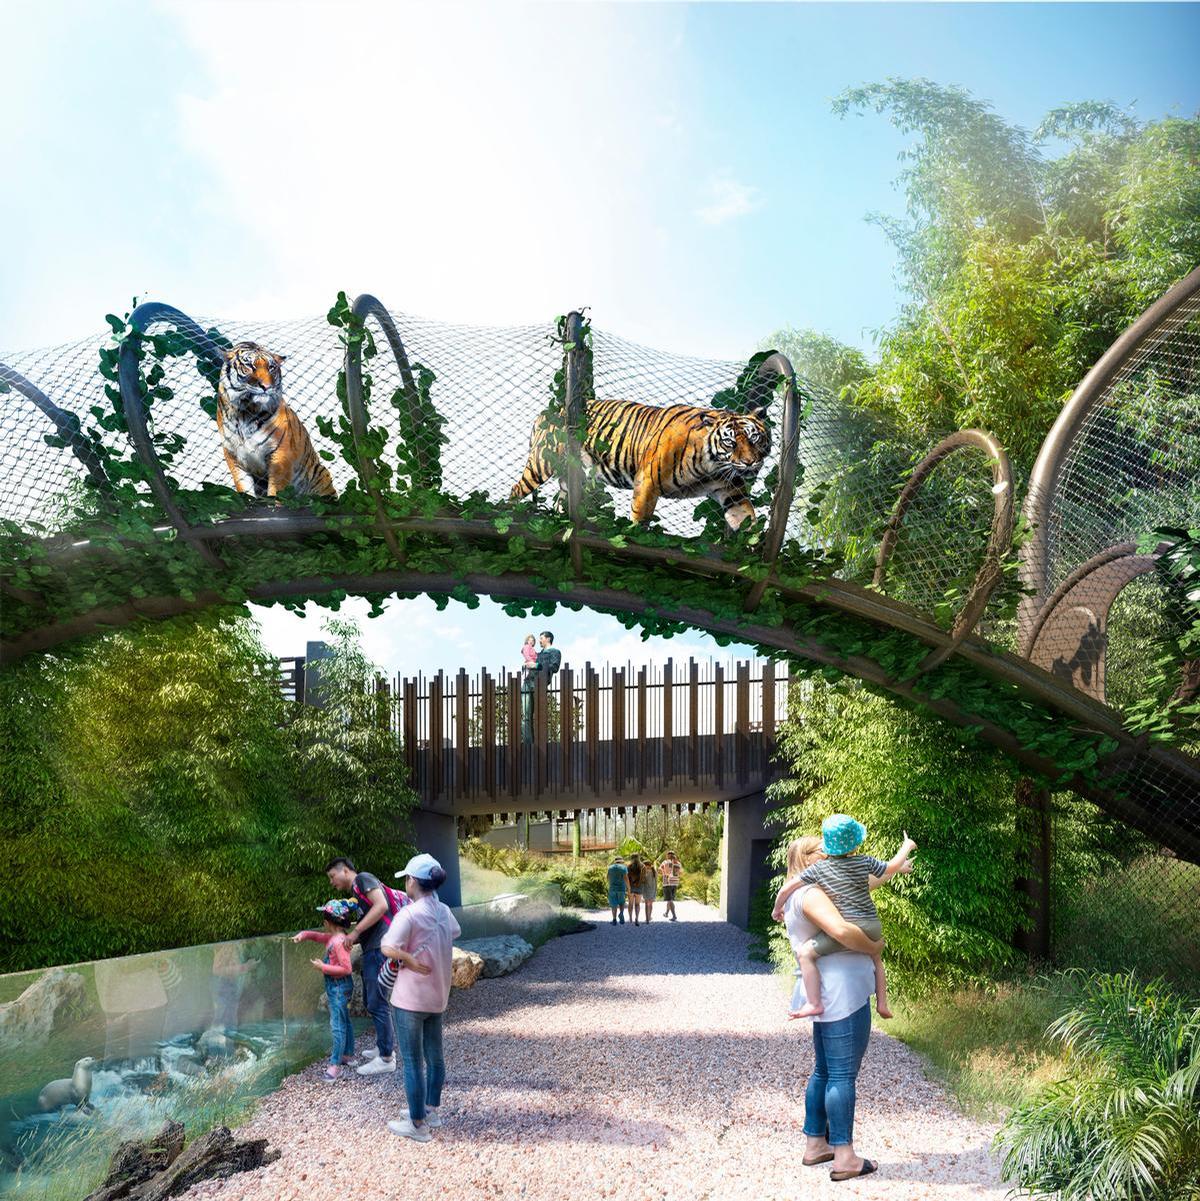 The new lowland habitat at Auckland Zoo will include elevated vantage points for tigers / Auckland Zoo